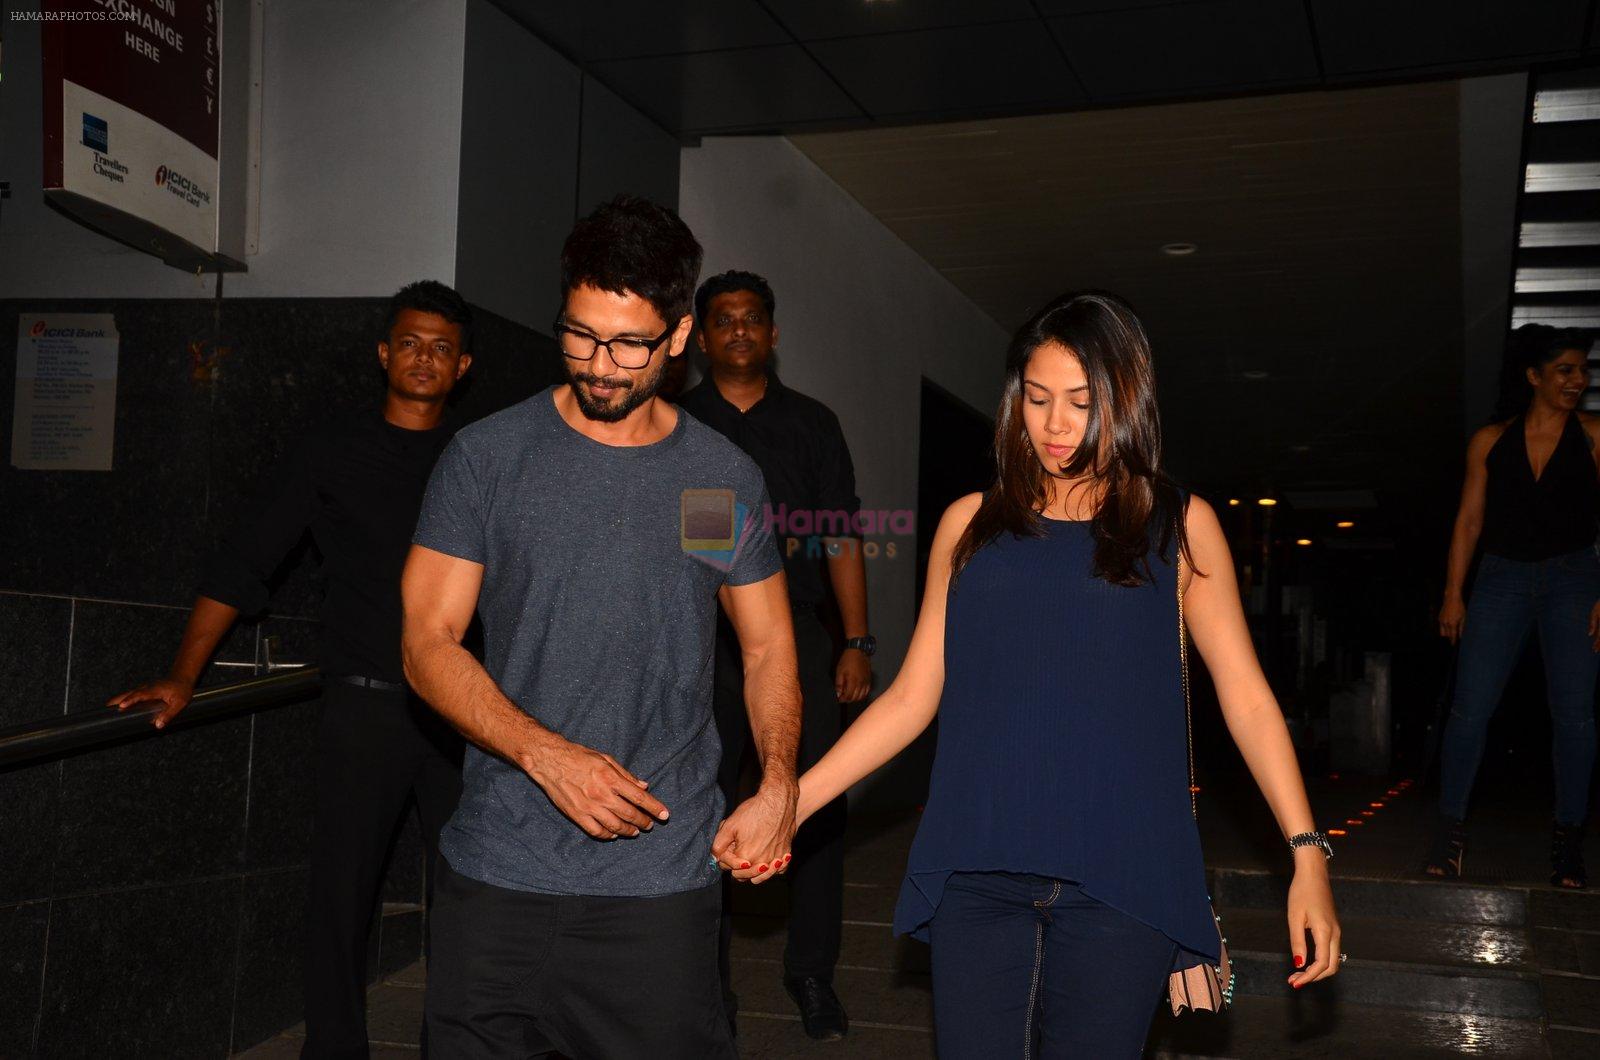 Shahid Kapoor and Mira Rajput snapped post dinner in Mumbai on 14th May 2016